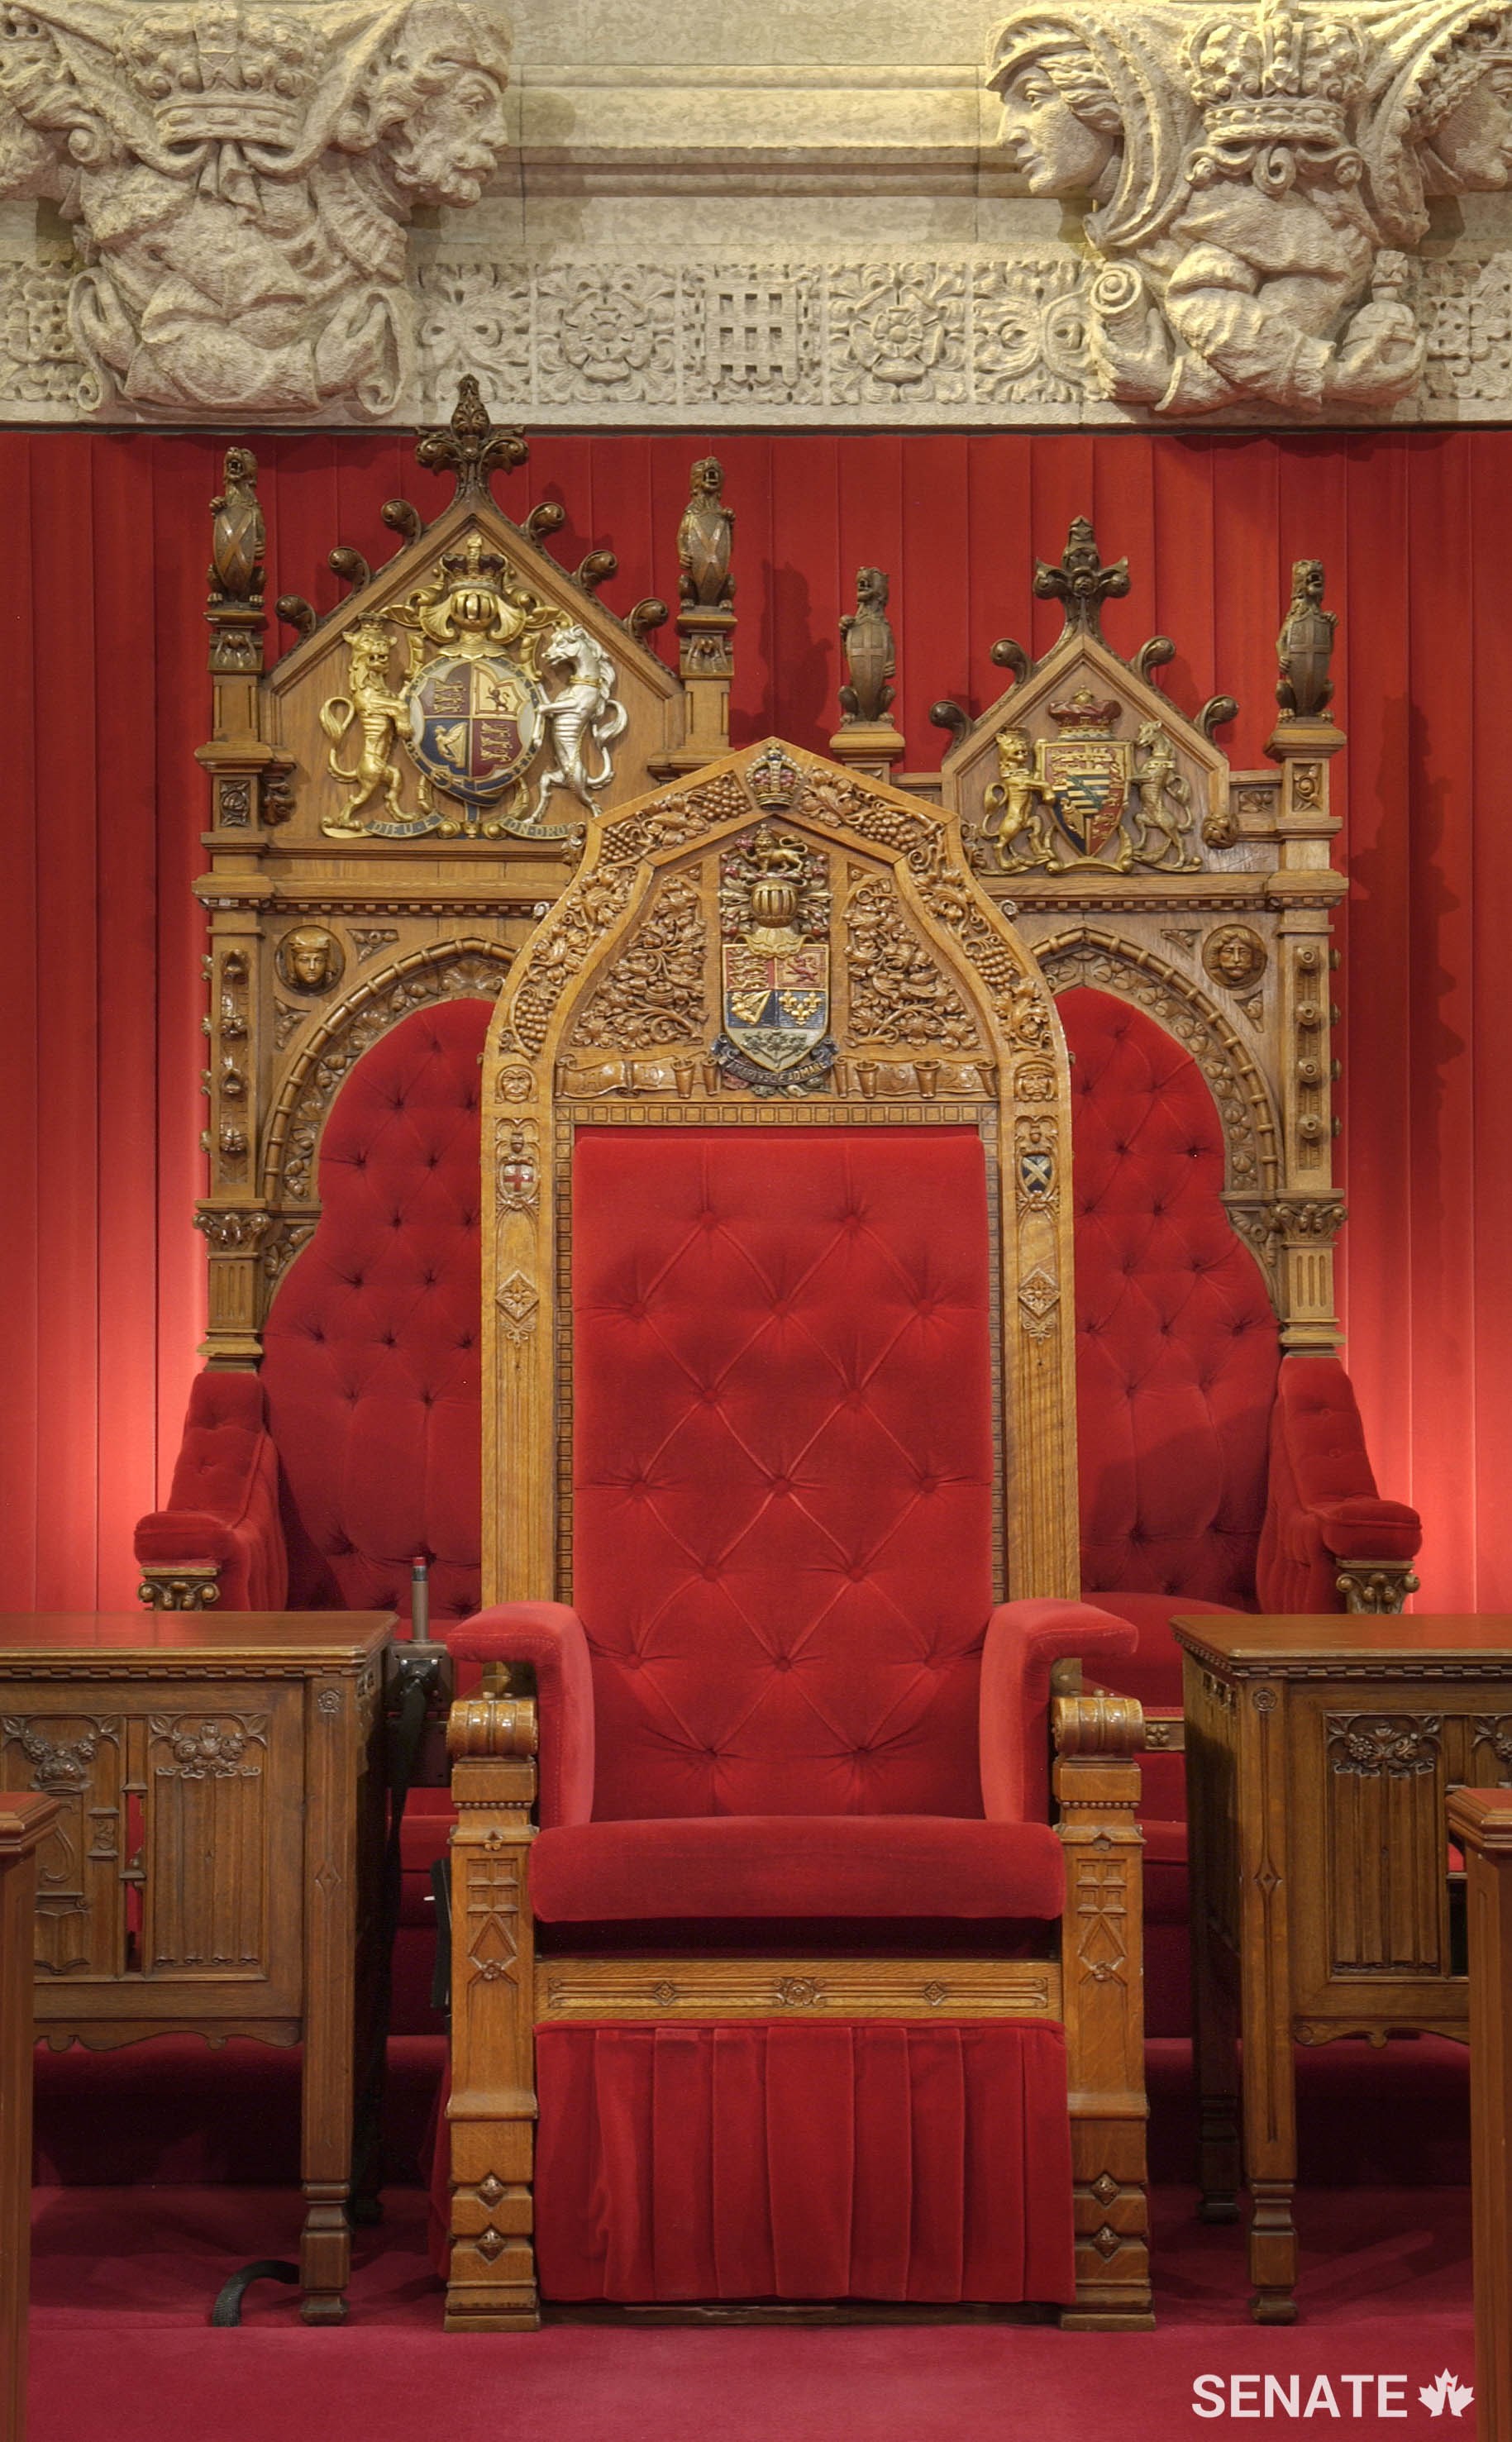 The monarch’s and consort’s thrones, carved in 1878, are among the very few Senate fixtures salvaged from the 1916 fire that destroyed the original Centre Block. The Senate Speaker’s chair in front was carved in 1923. All three went into storage and less ornate versions created specifically for the new Senate Chamber are being used in the interim.